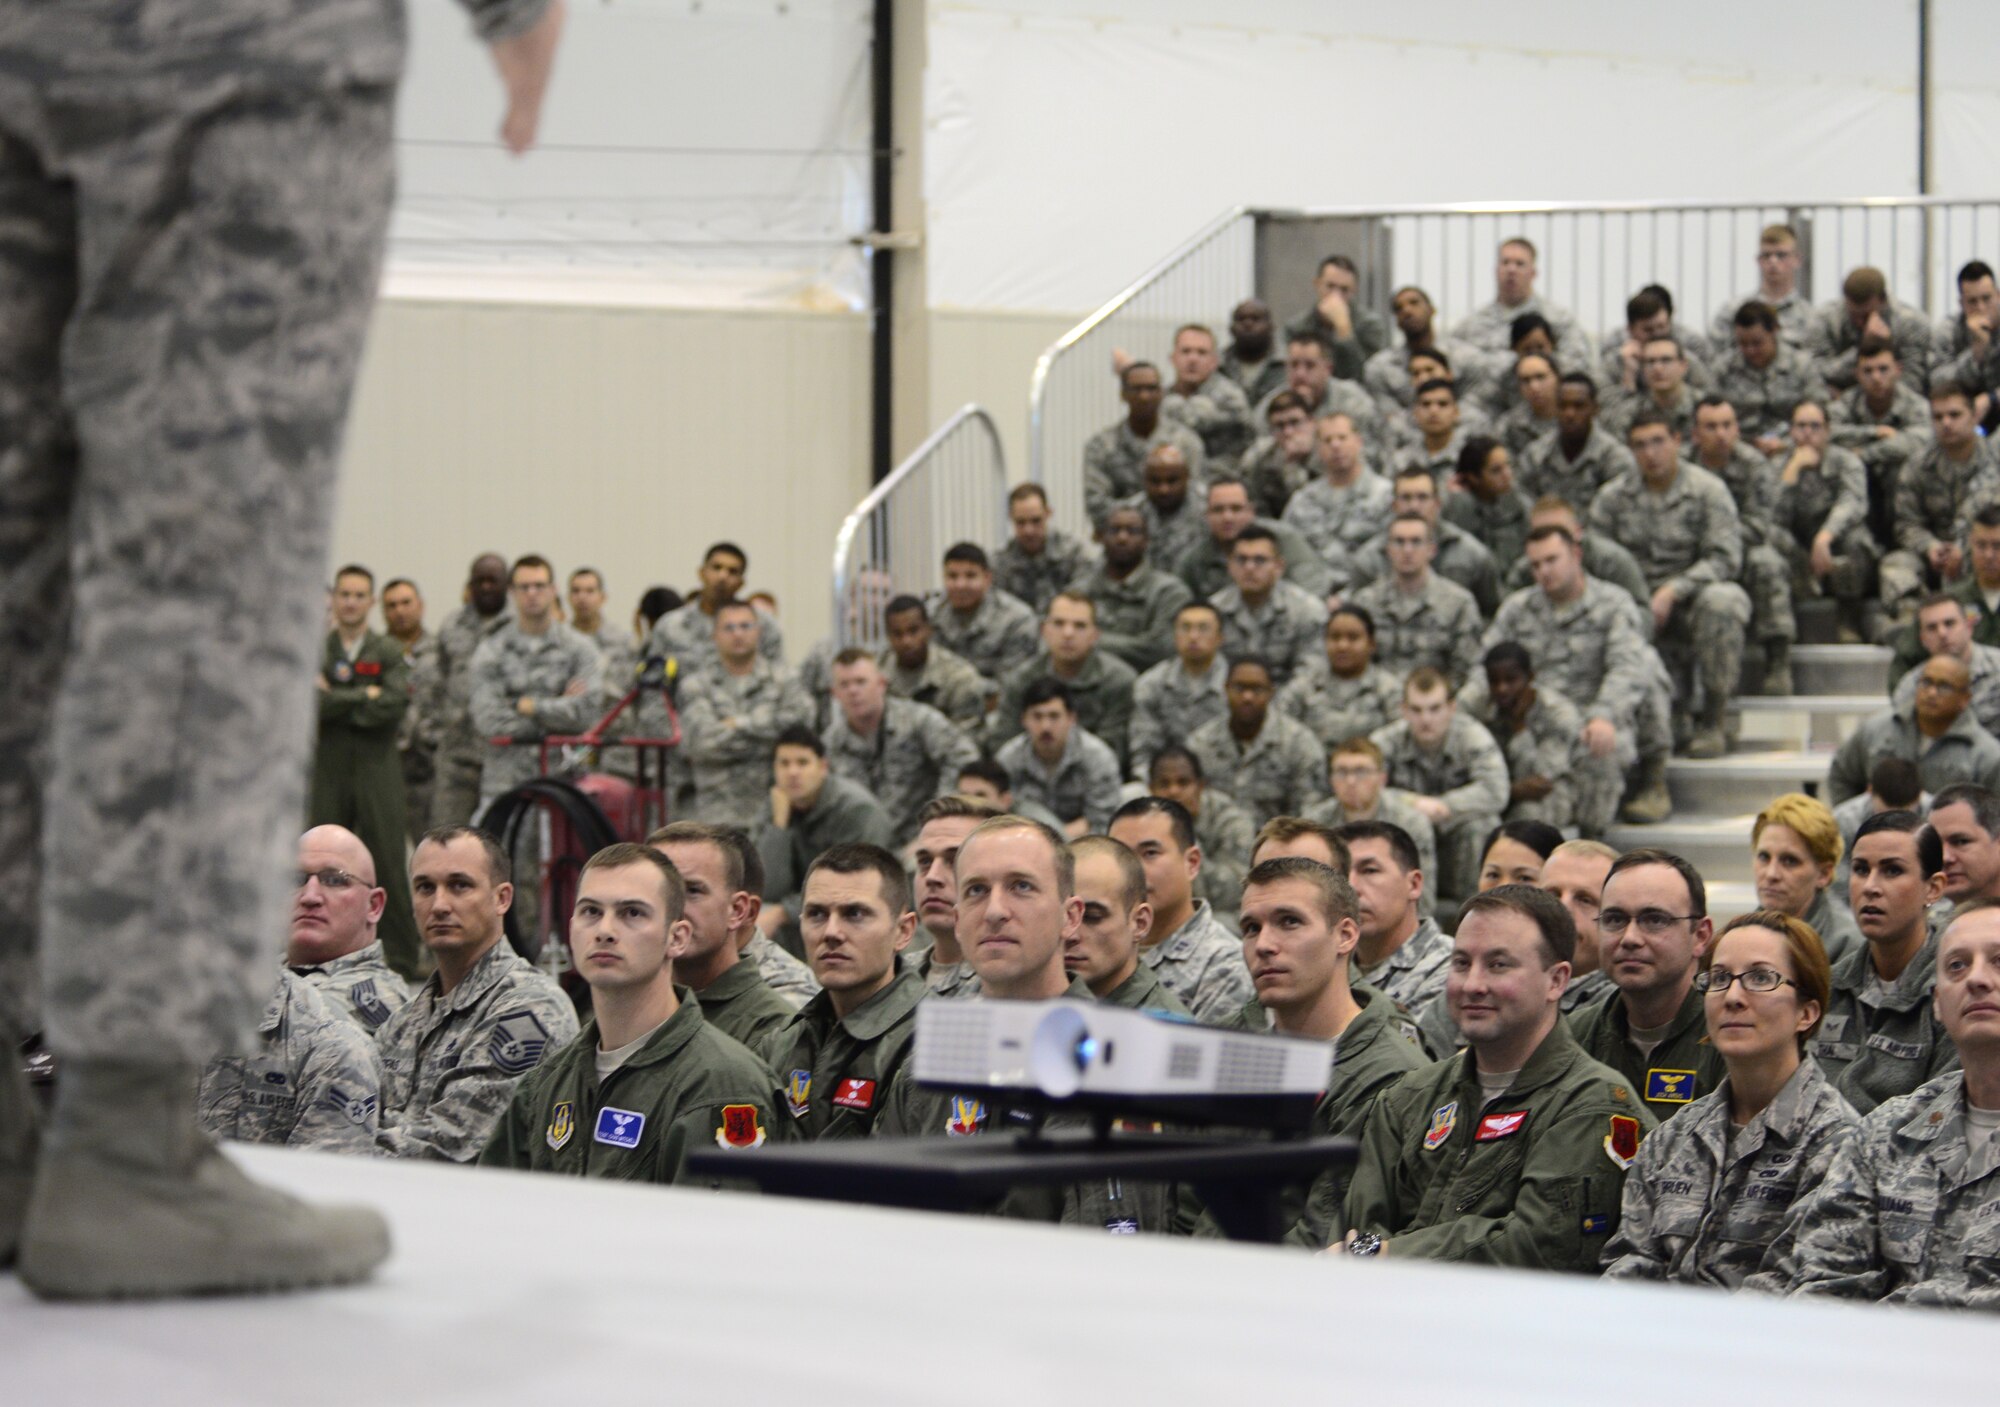 Airmen from the 432nd Wing/432nd Air Expeditionary Wing listen to Gen. Hawk Carlisle, commander of Air Combat Command, speak during an all-call Jan. 14, 2016, as part of his visit to Creech Air Force Base, Nevada. Carlisle spoke about issues related to the remotely piloted aircraft community during the all-call. (U.S. Air Force photo by Senior Airman Christian Clausen/Released)